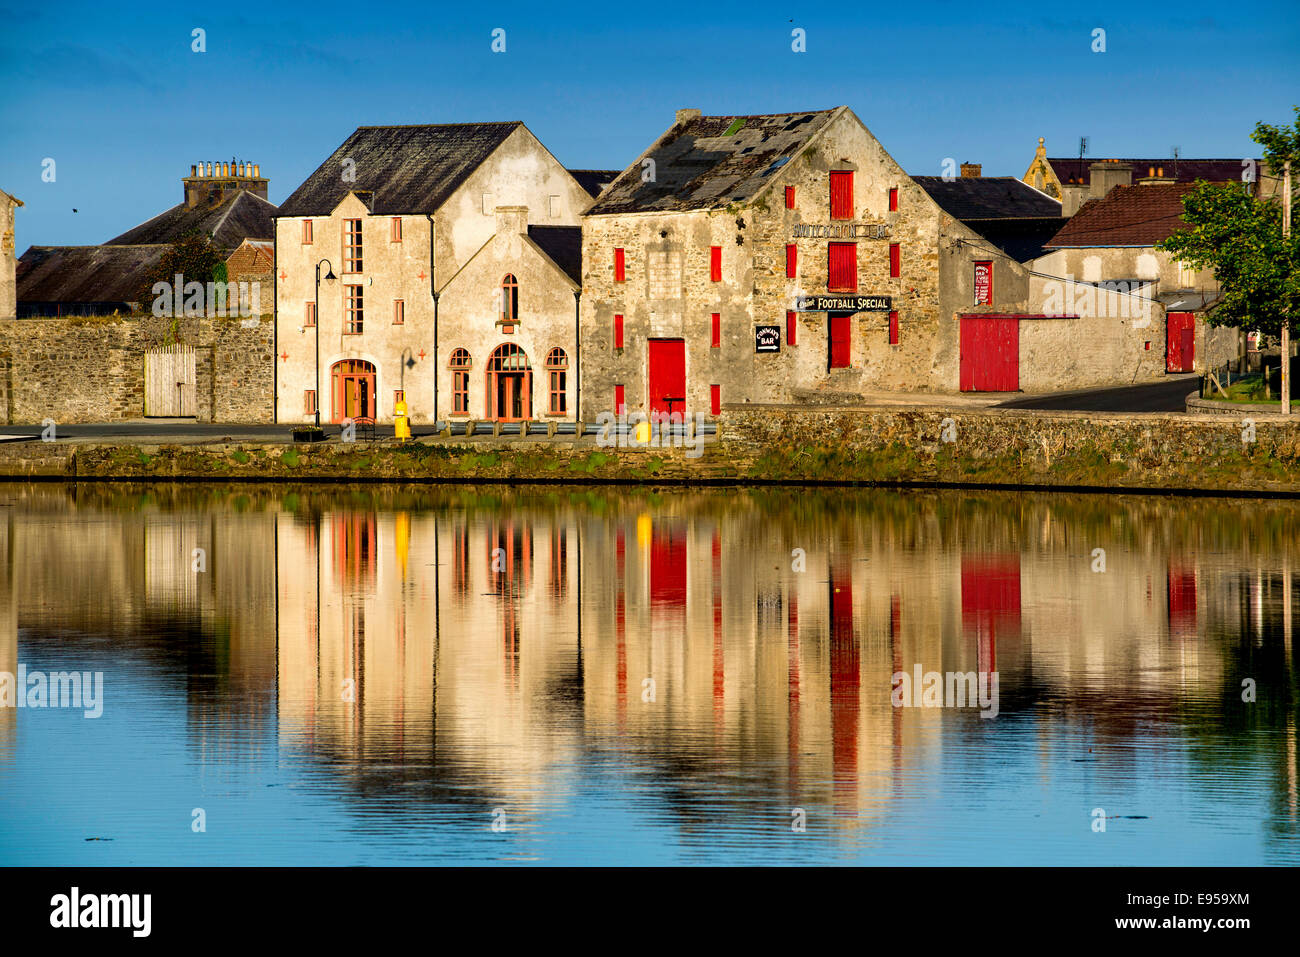 Ramelton on the river Lennon, Lough Swilly, co. Donegal, Ireland Stock Photo